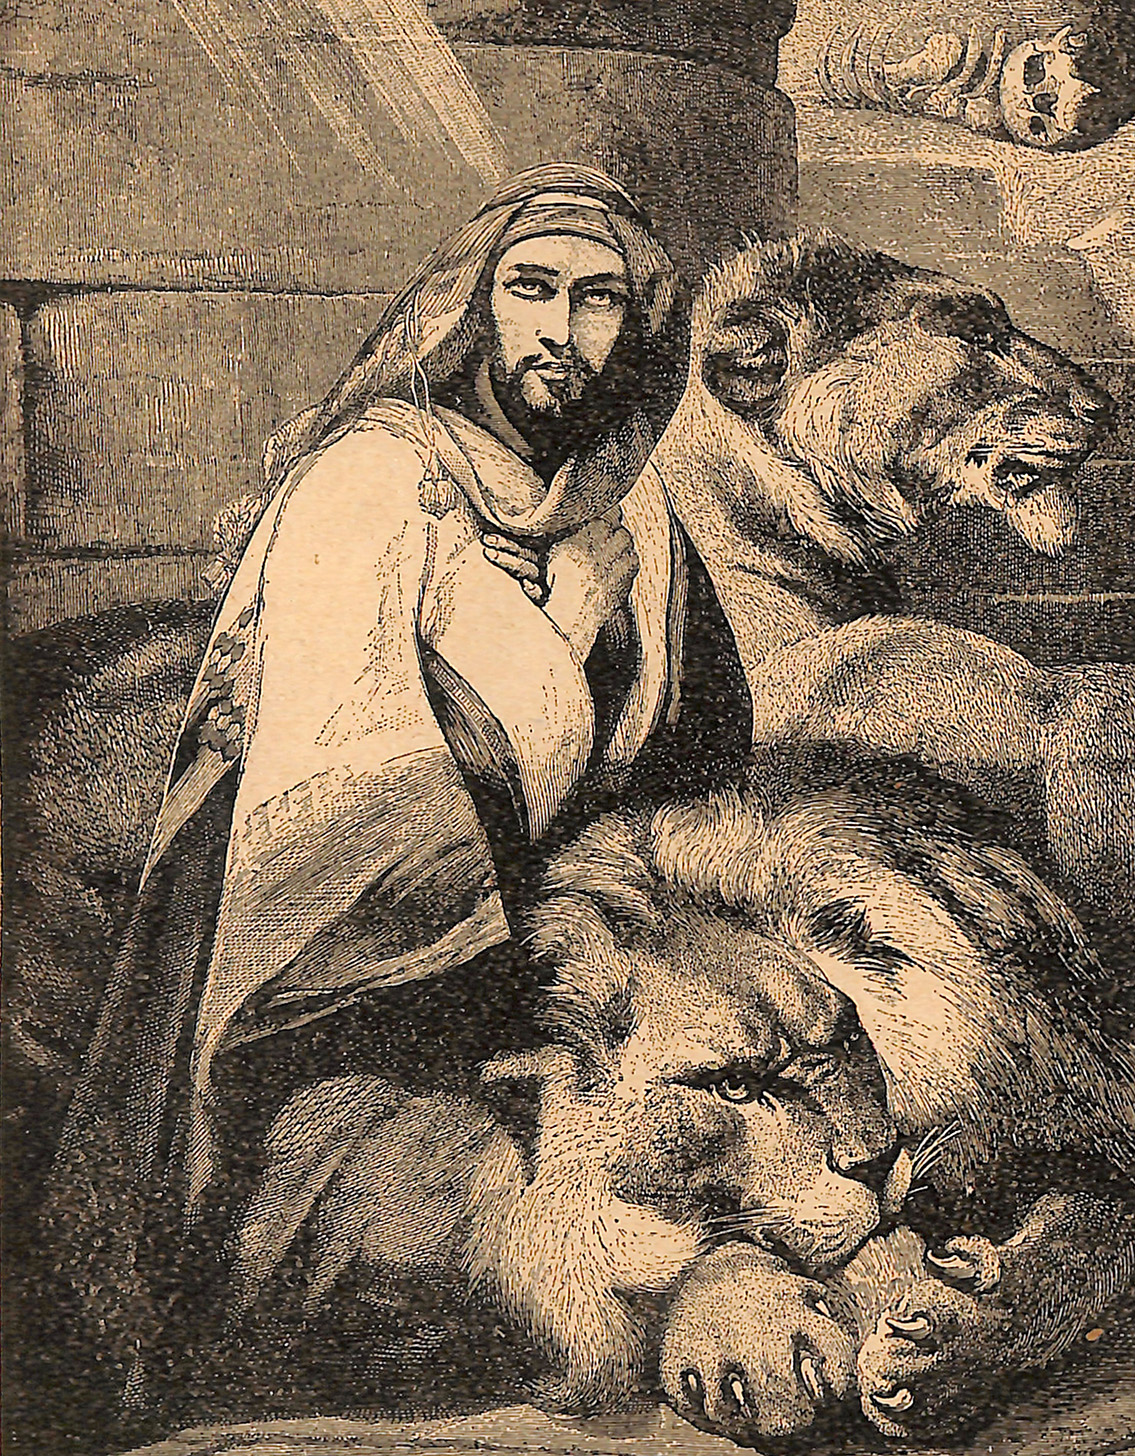 Daniel And The Lions